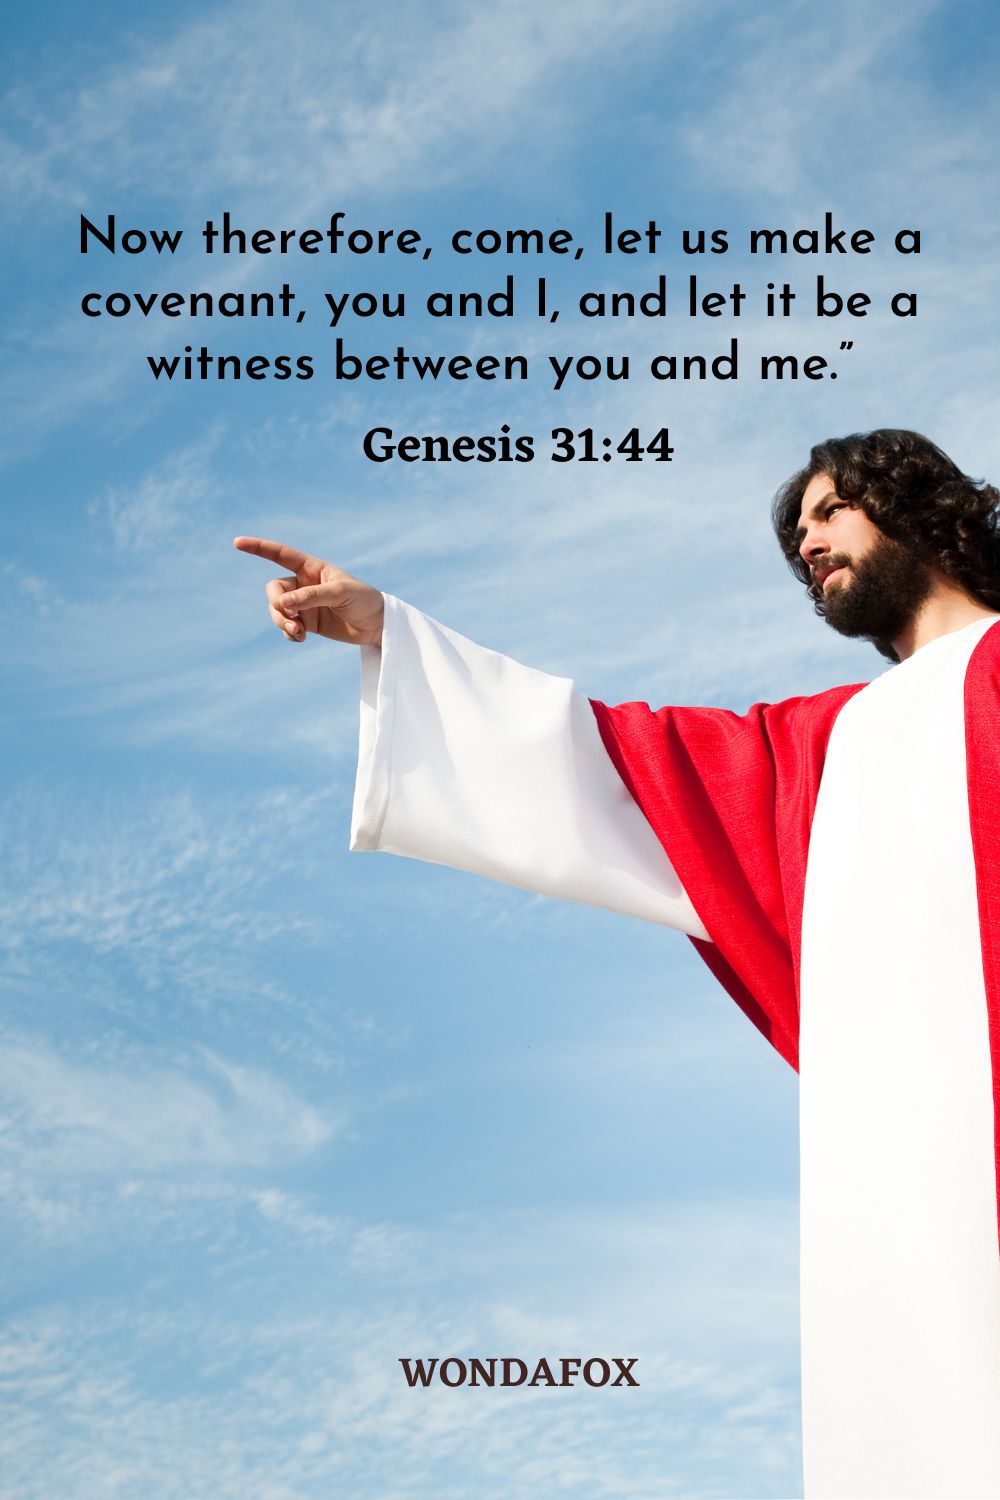 Now therefore, come, let us make a covenant, you and I, and let it be a witness between you and me.”
Genesis 31:44